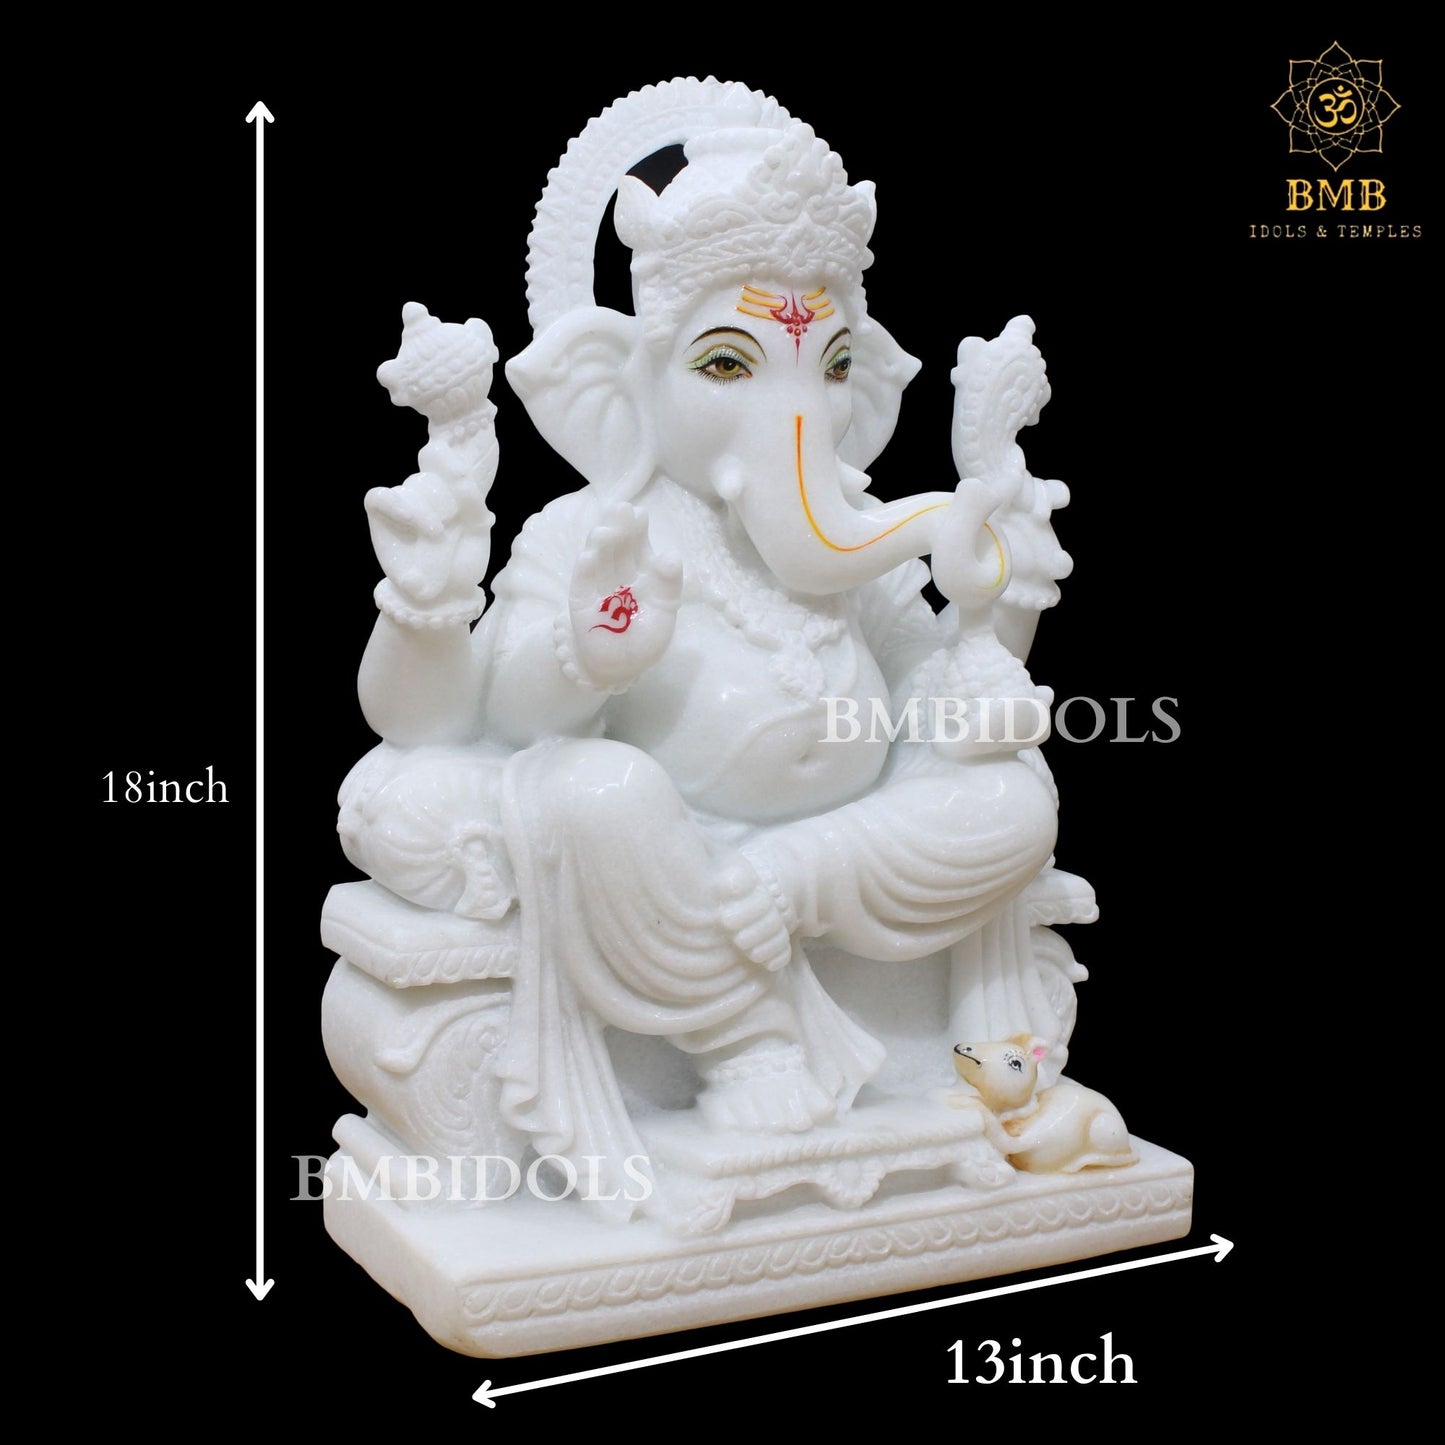 Marble Ganesh Statue made in 18inches for Homes and Temples, Ganpati Murti